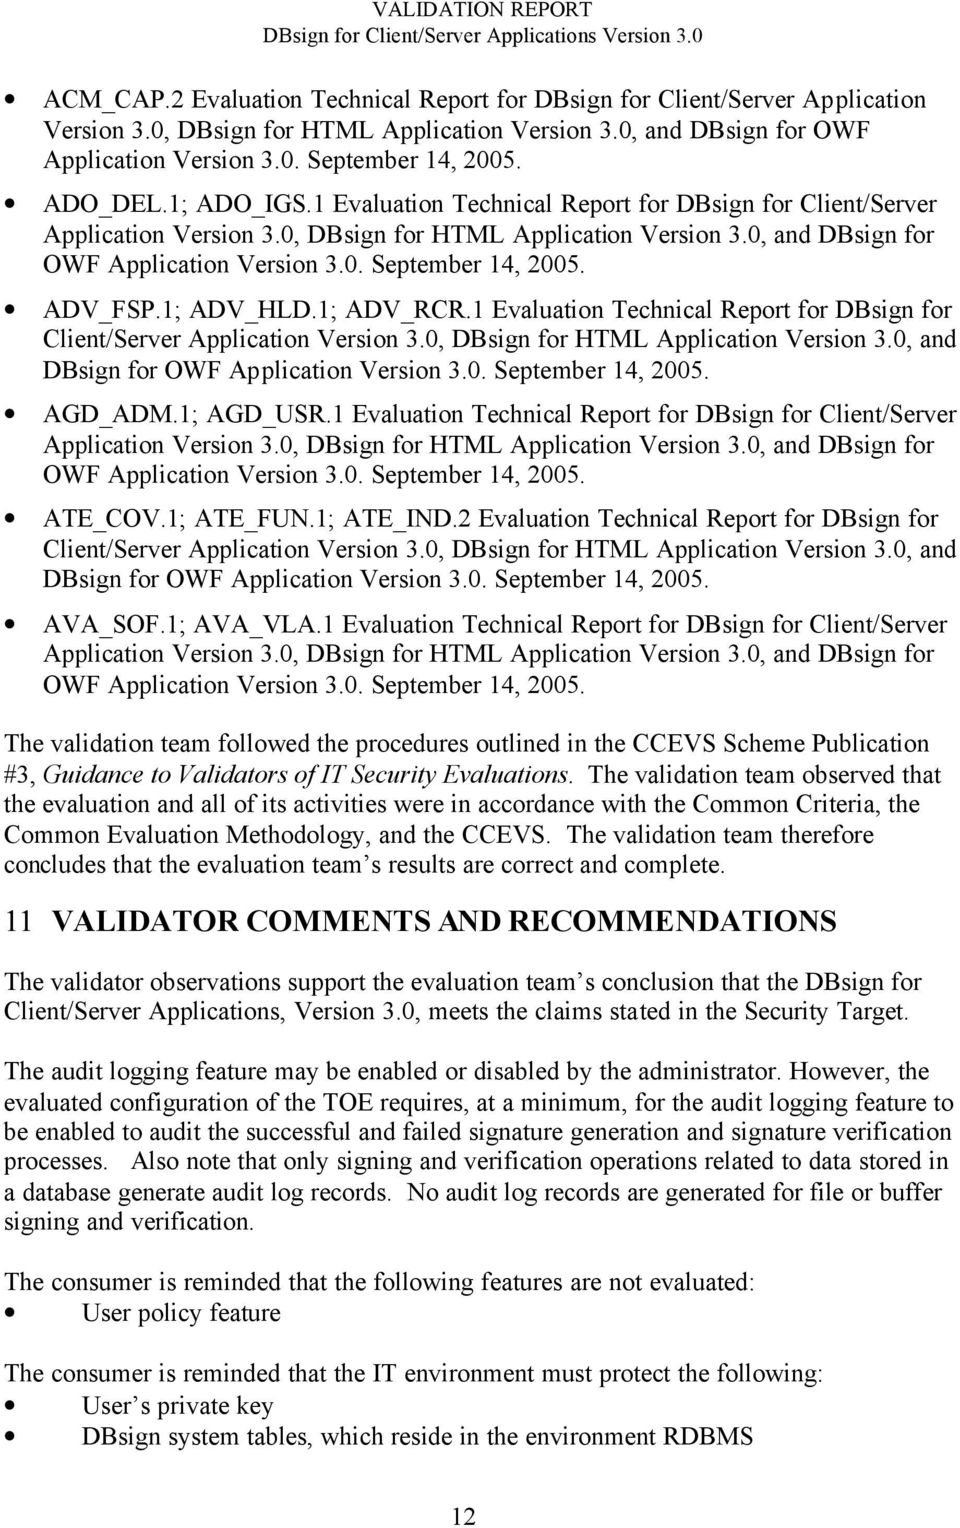 ADV_FSP.1; ADV_HLD.1; ADV_RCR.1 Evaluation Technical Report for DBsign for Client/Server Application Version 3.0, DBsign for HTML Application Version 3.0, and DBsign for OWF Application Version 3.0. September 14, 2005.